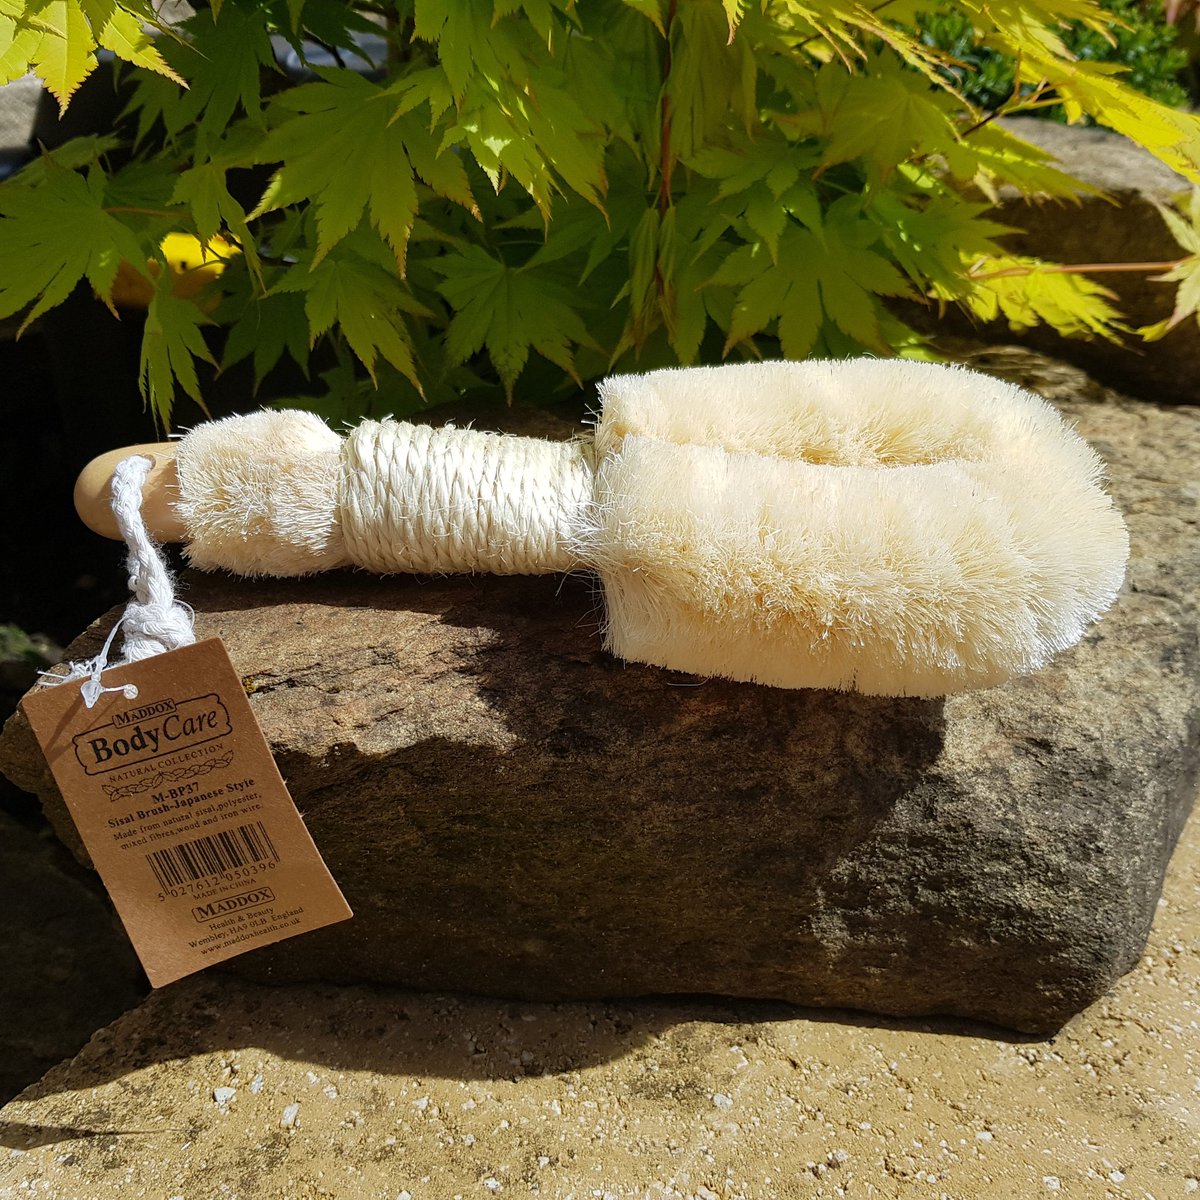 BACK IN STOCK 

Japanese style sisal brush
great for removing dead skin and reviving your skin for that summer glow

(not suitable for vegans)

#summerbody
#summervibes #glowingskin #skincareuk #deadskinremoval #removedeadskin #sisalbrush #bodybrushing #bodybrush